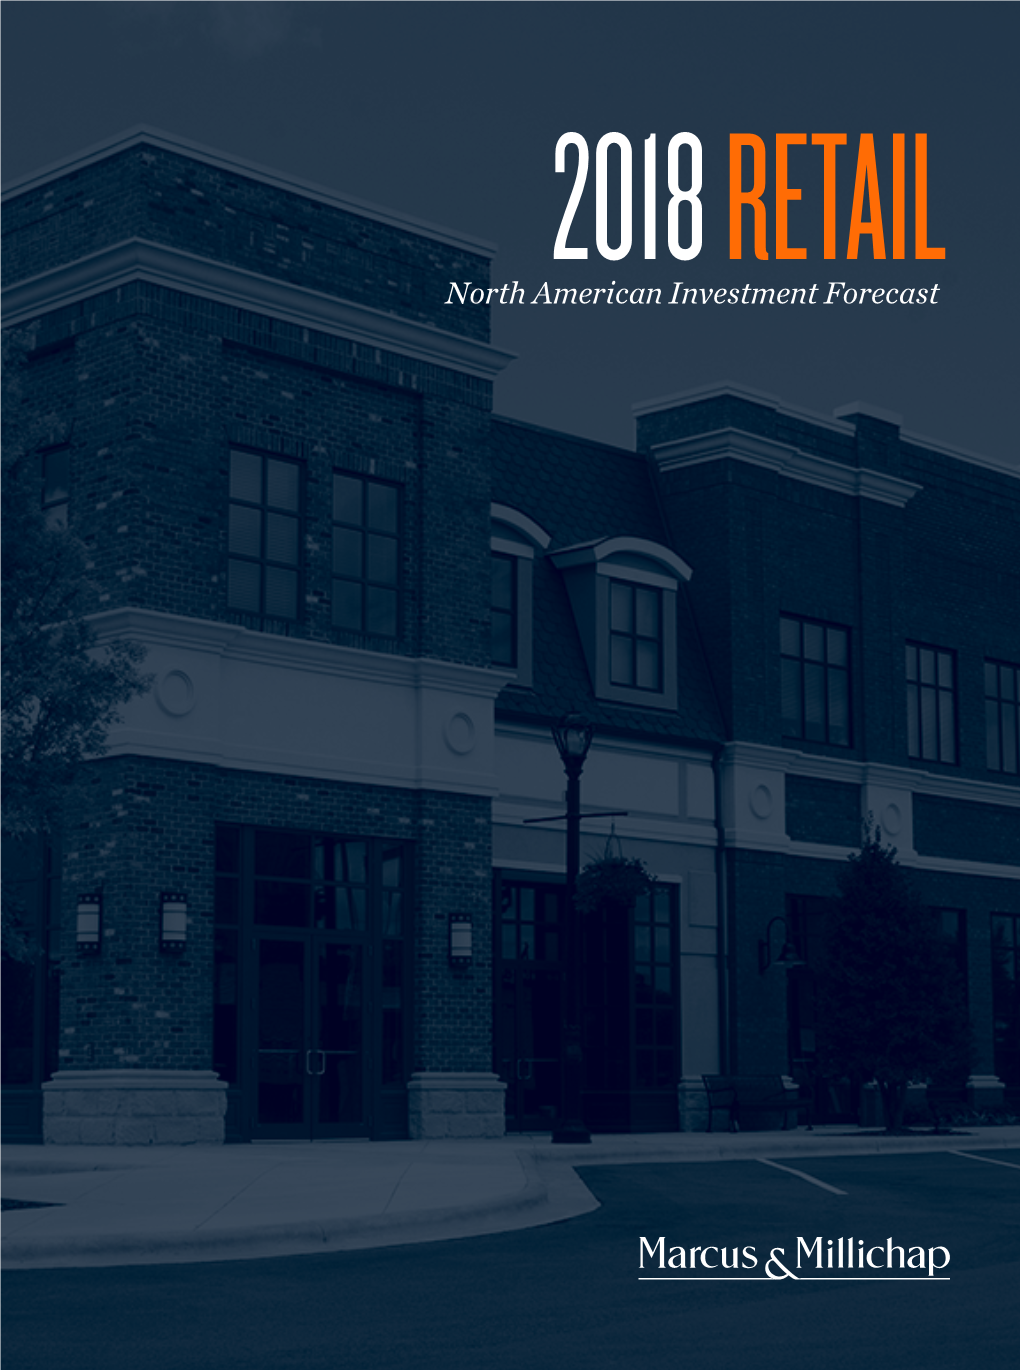 2018 North American Retail Investment Forecast